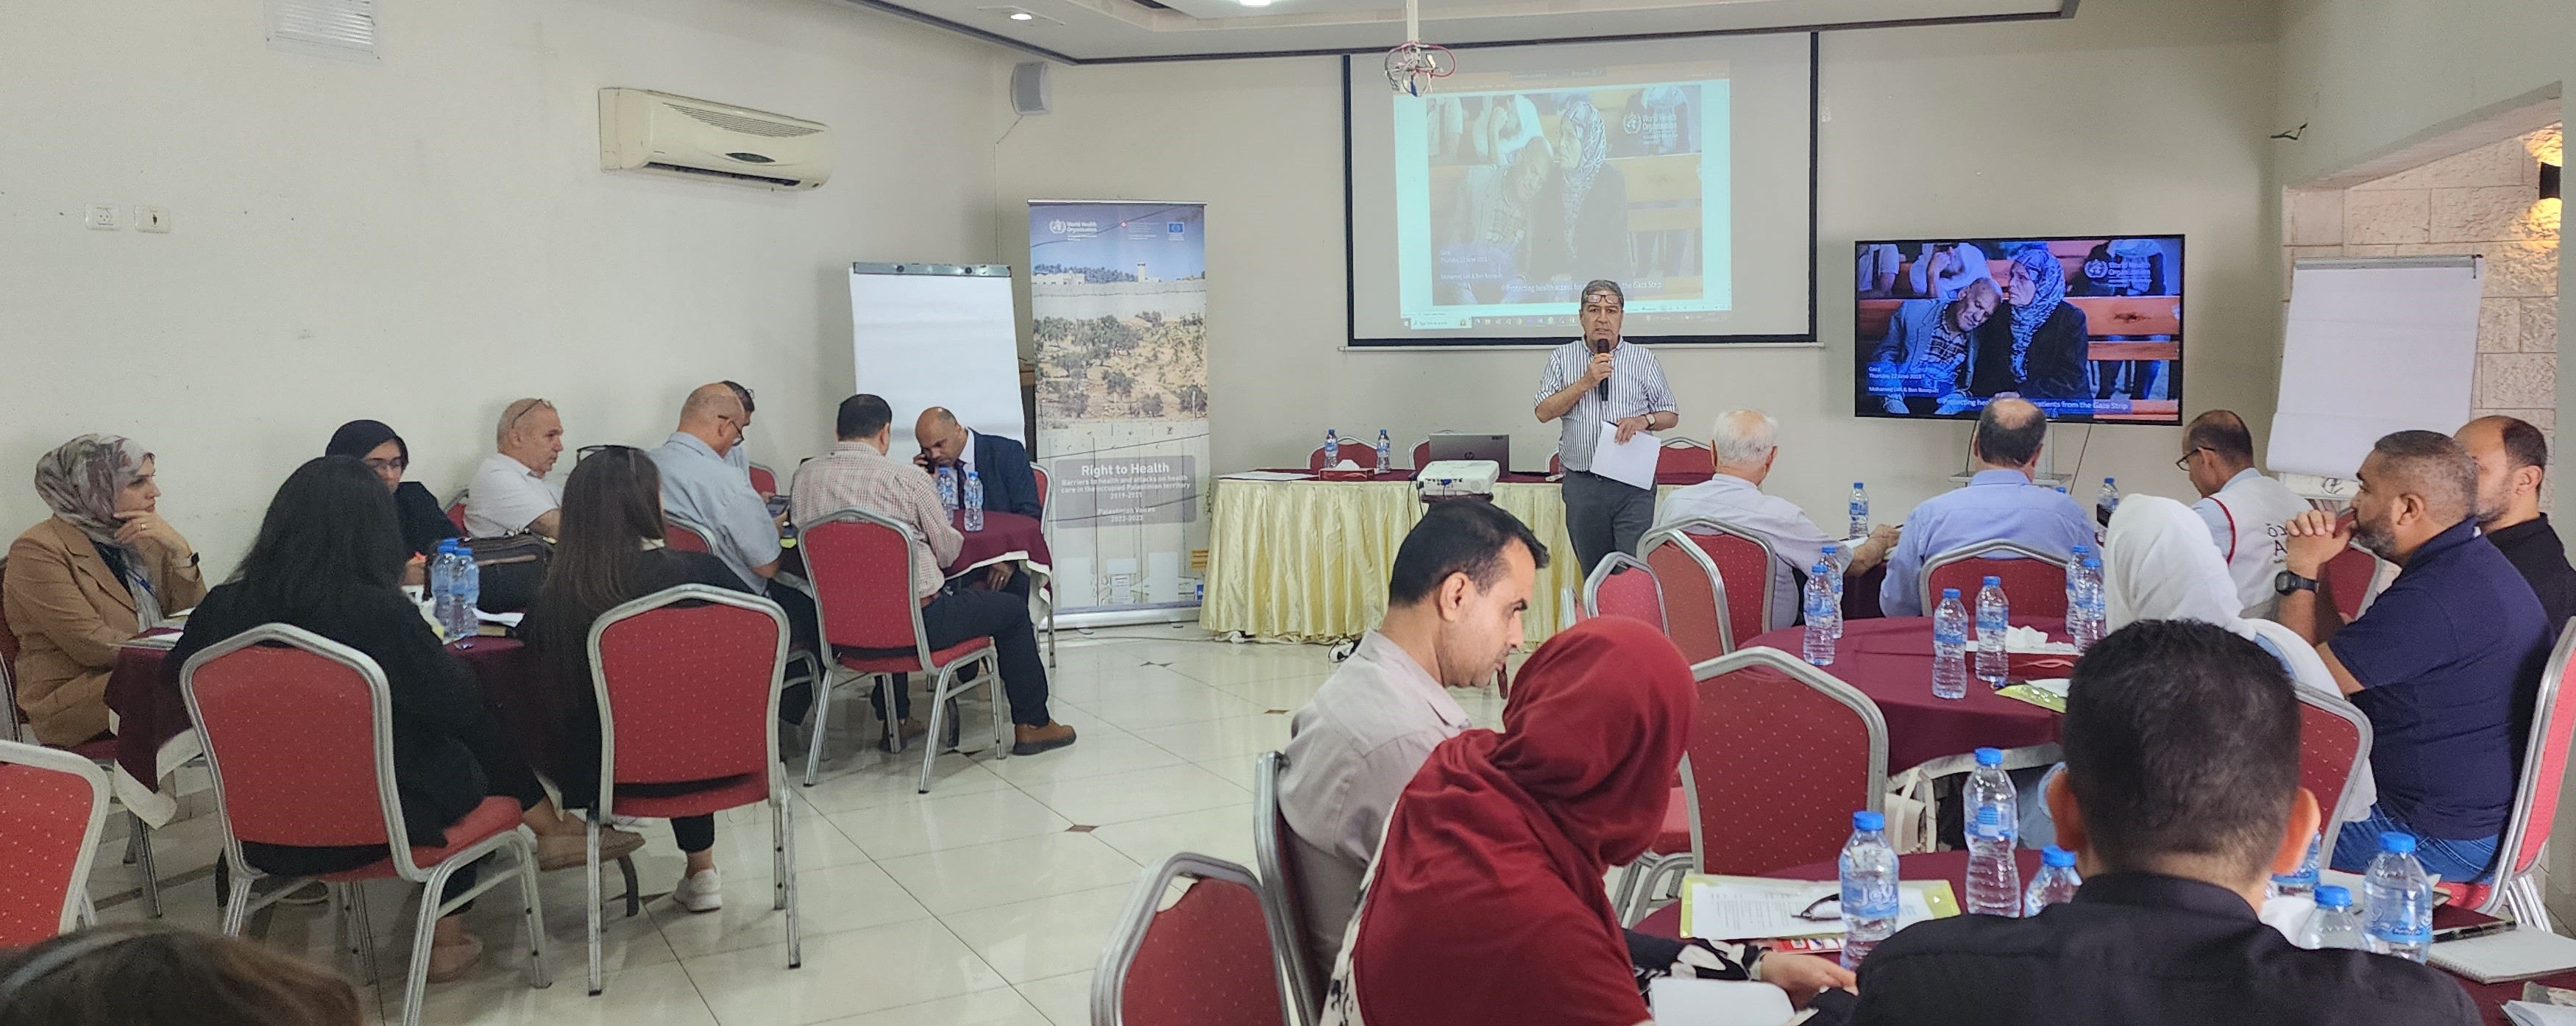 Strengthening protection of health care in the occupied Palestinian territory